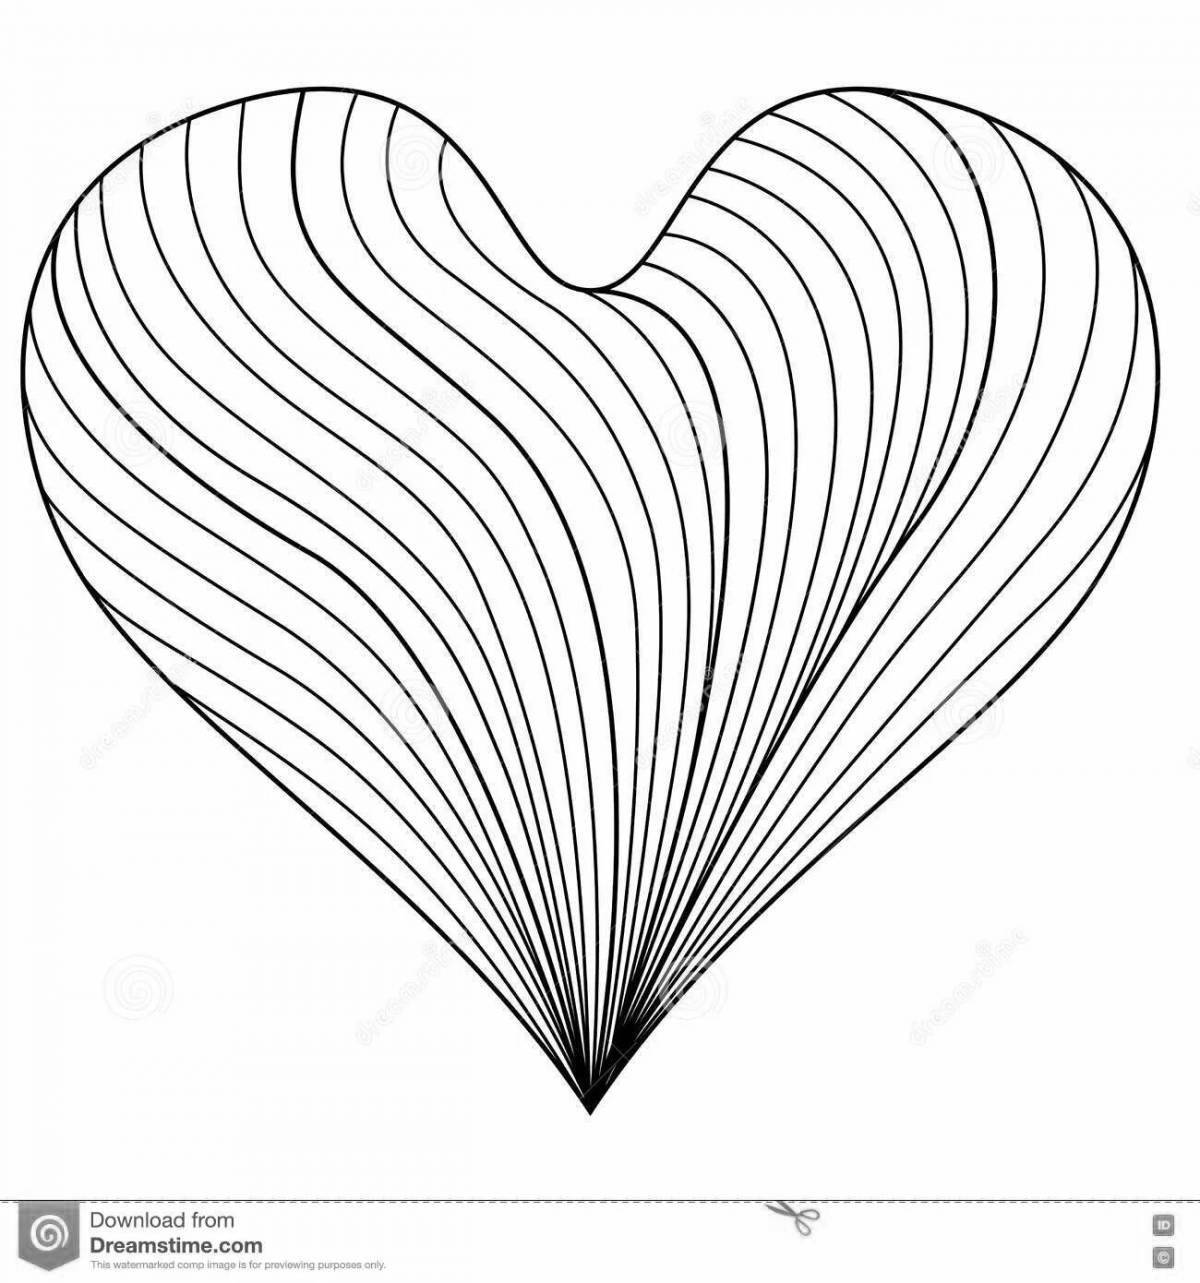 Glowing rainbow heart coloring page